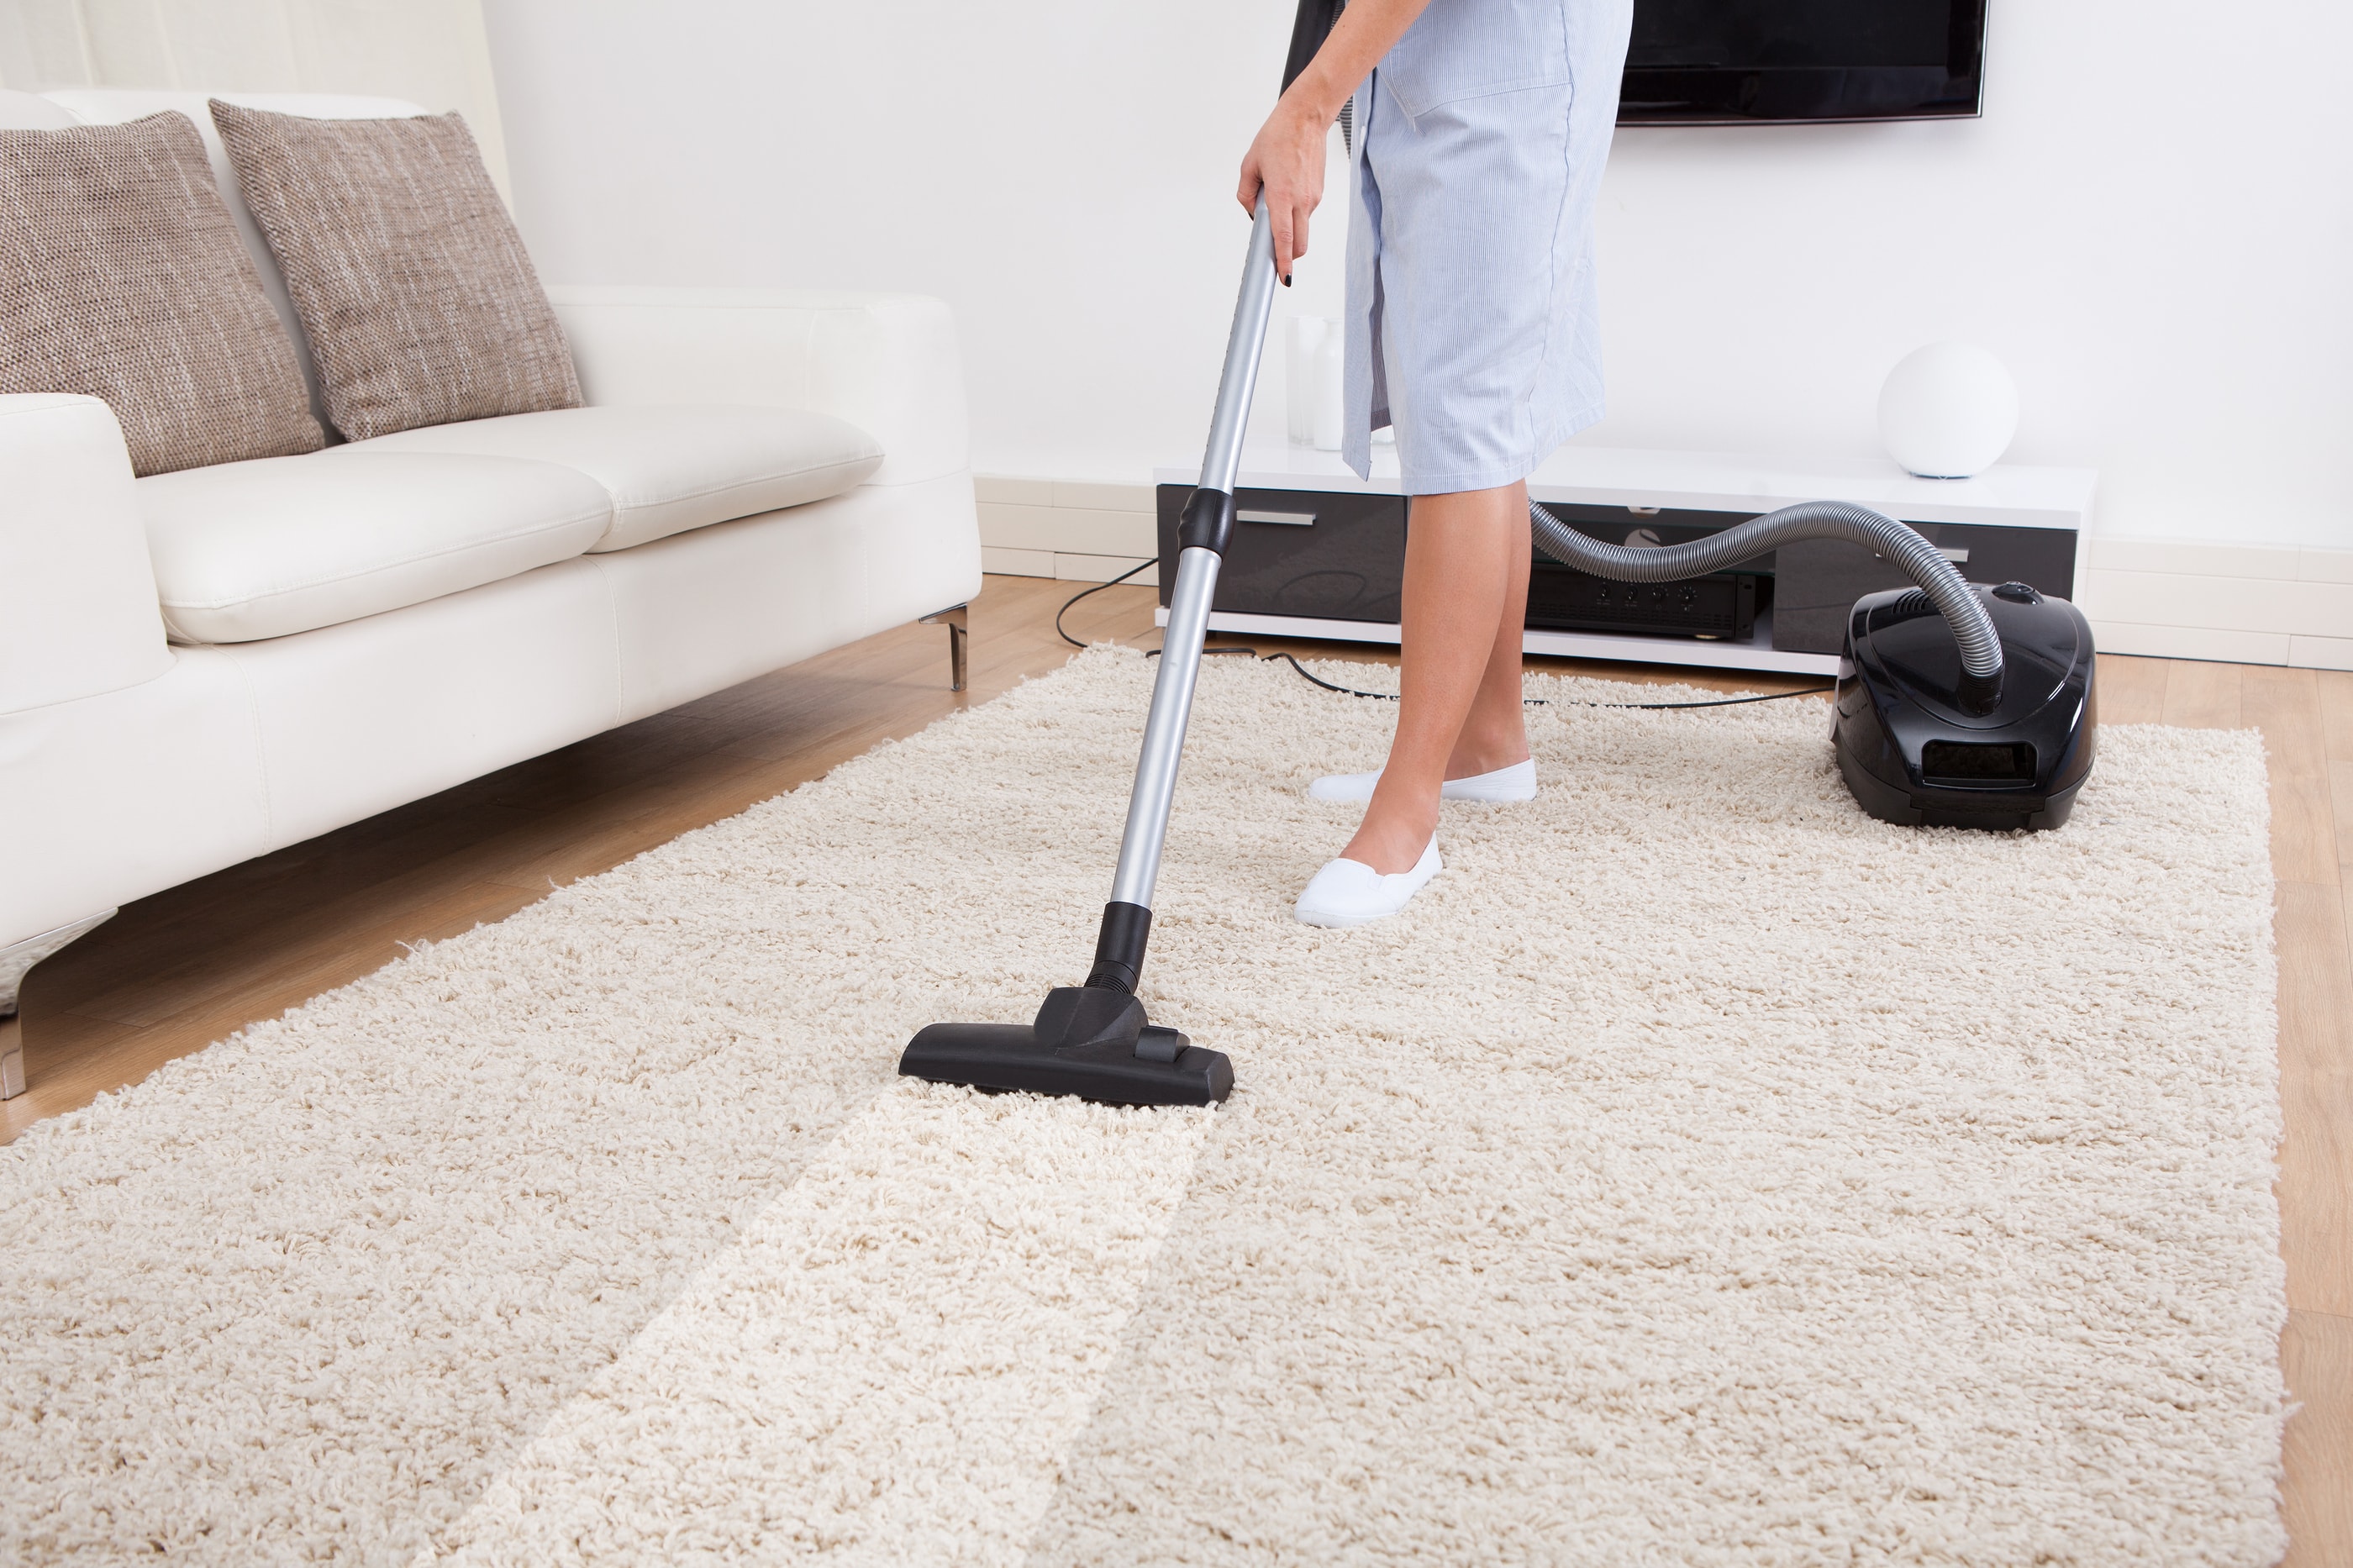 Prescott Carpet Cleaner. Why You Need To Pick The Best?